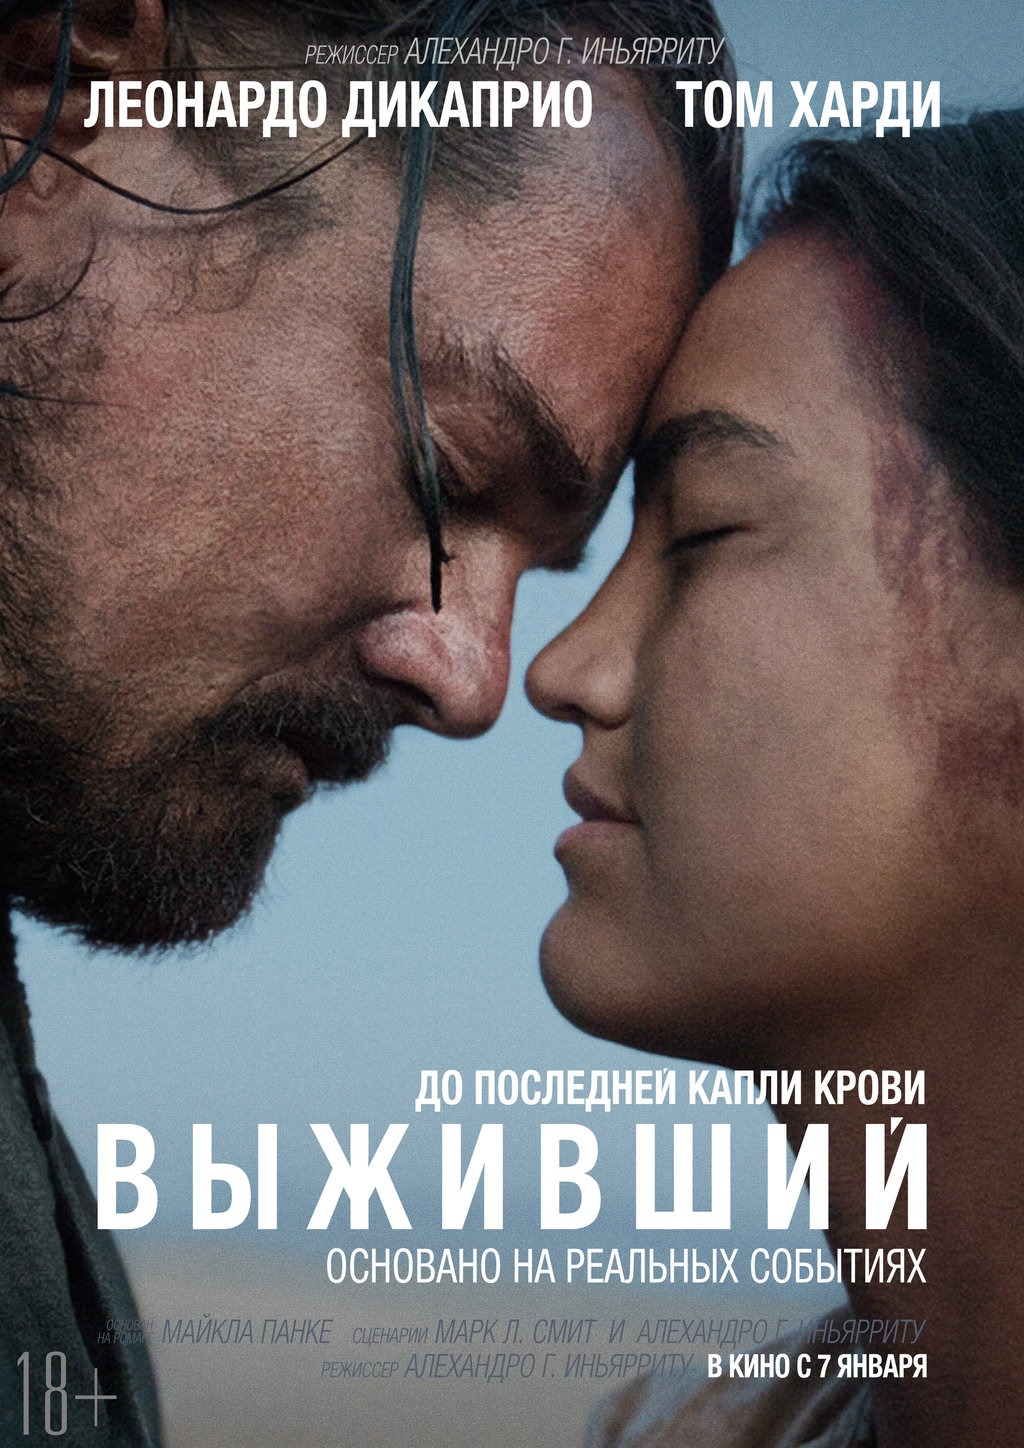 Extra Large Movie Poster Image for The Revenant (#6 of 7)